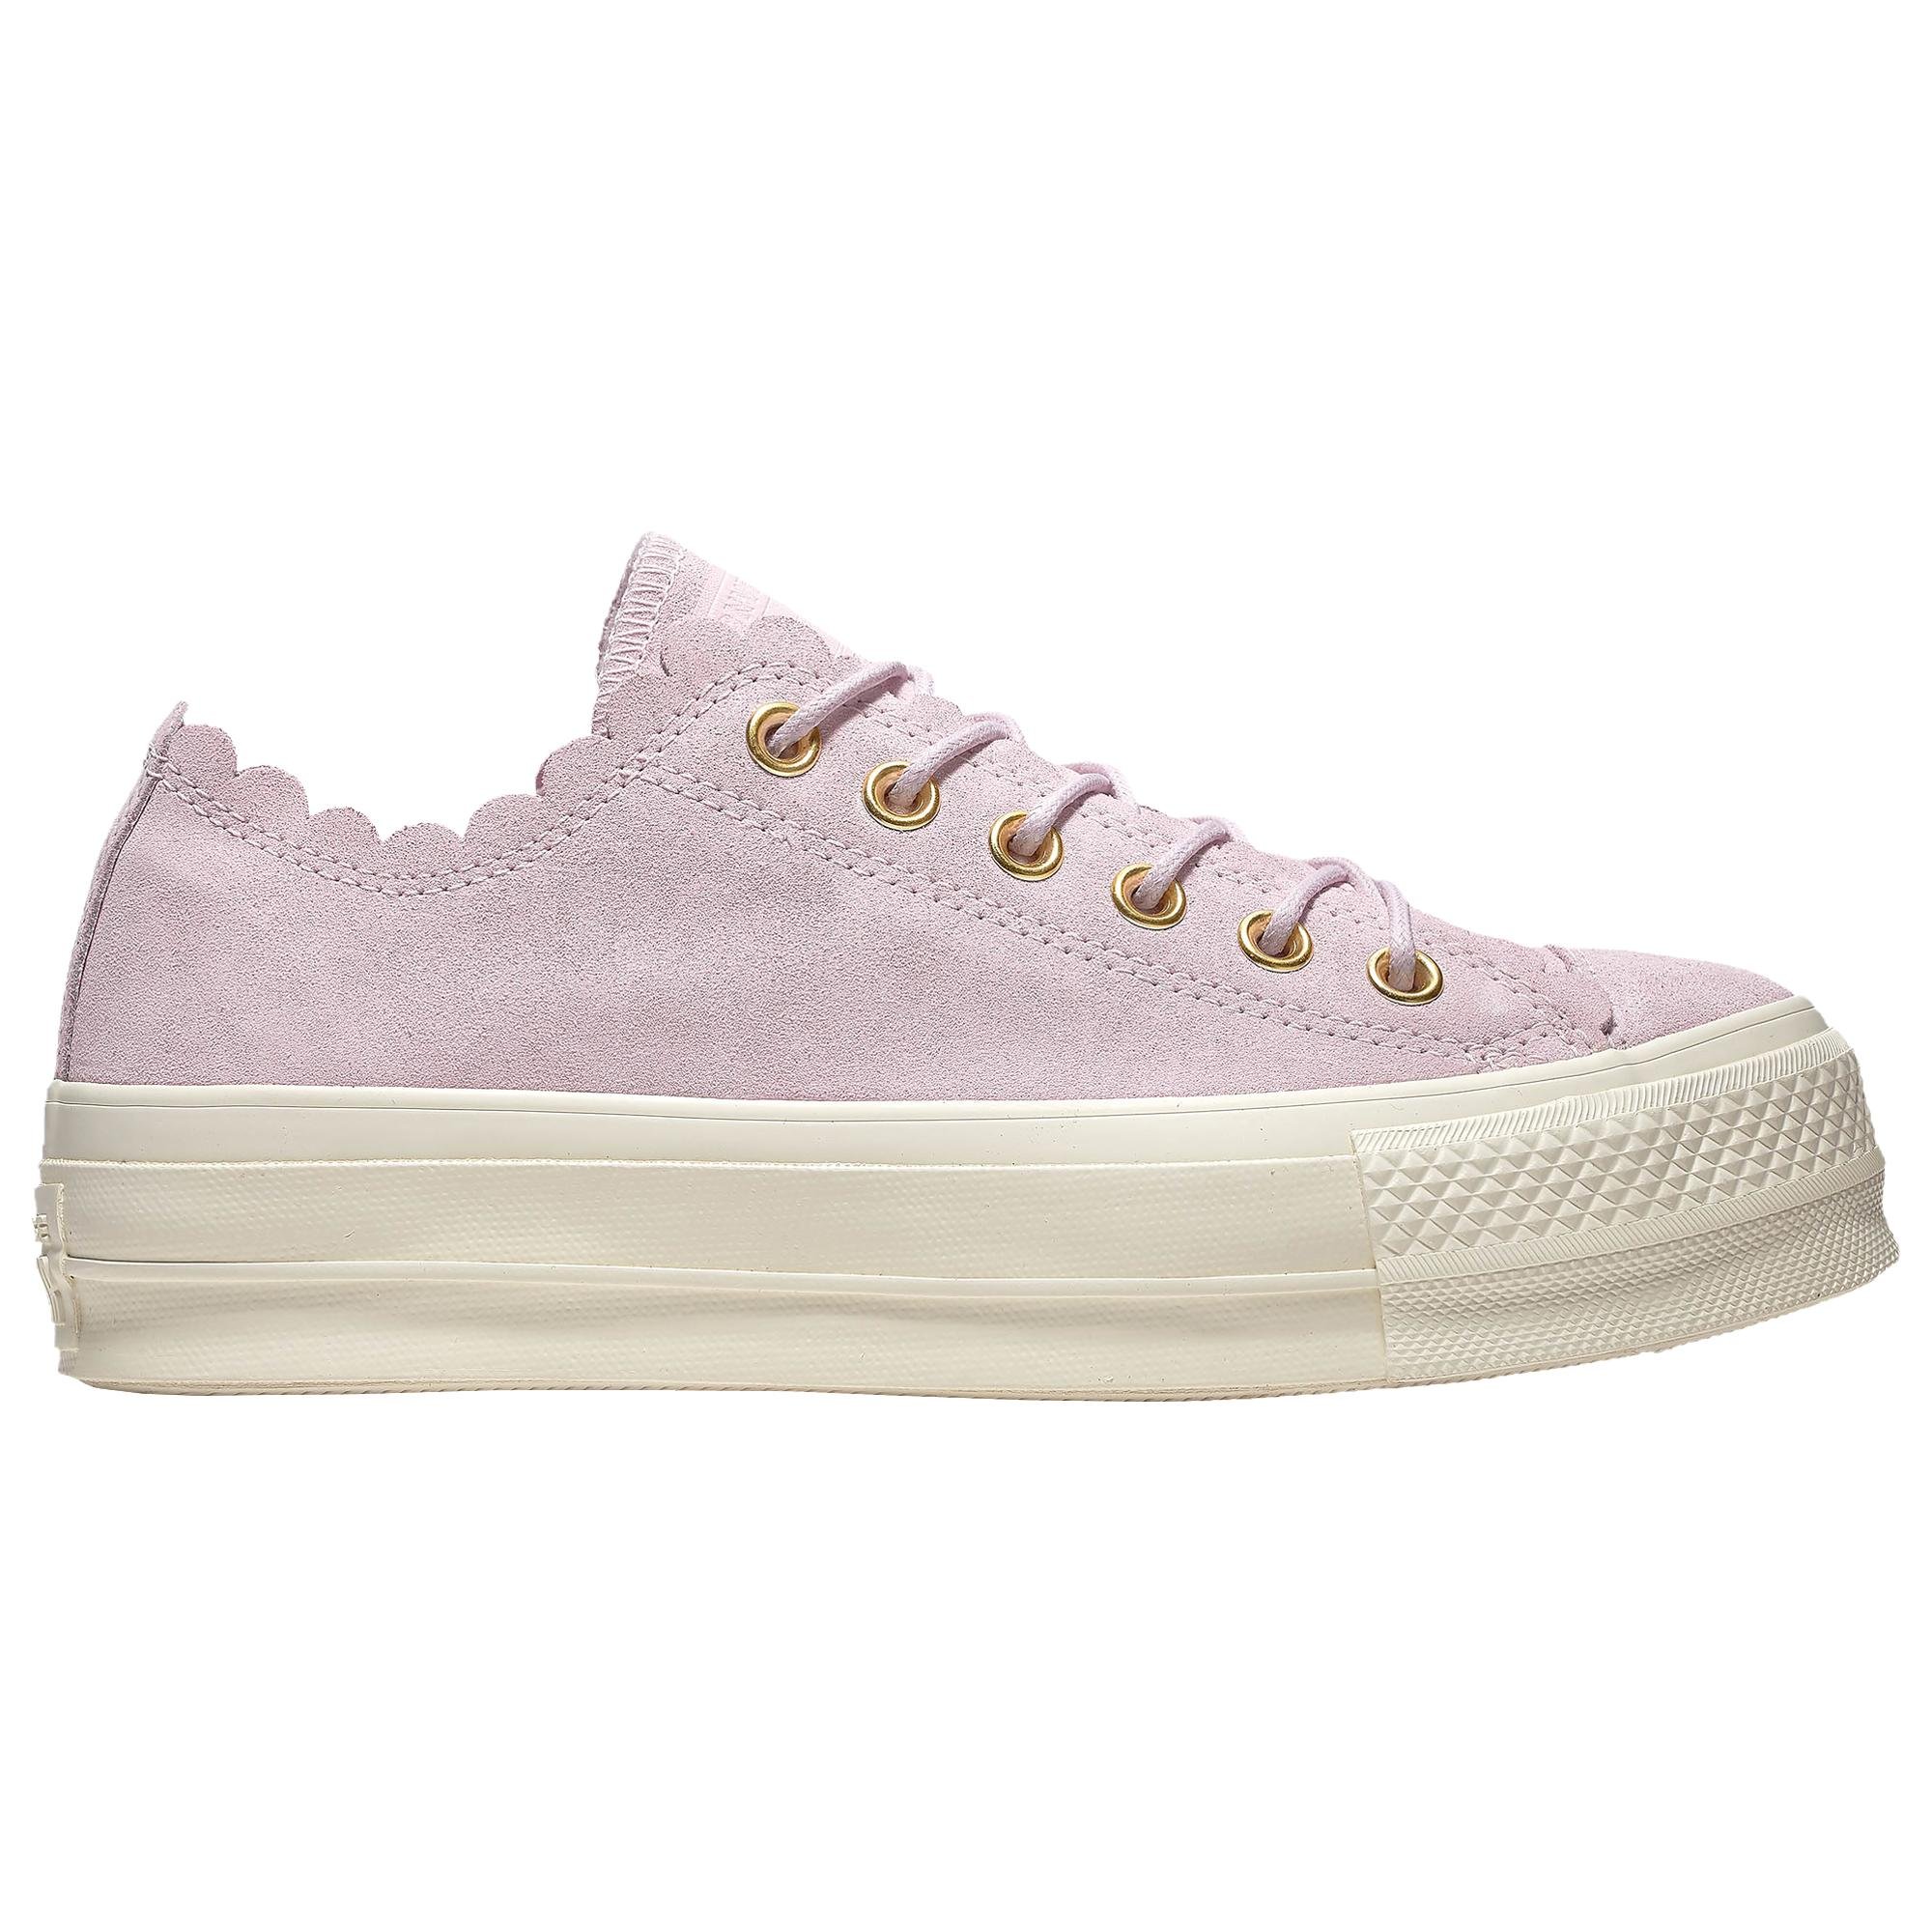 chuck taylor all star frilly thrills low top